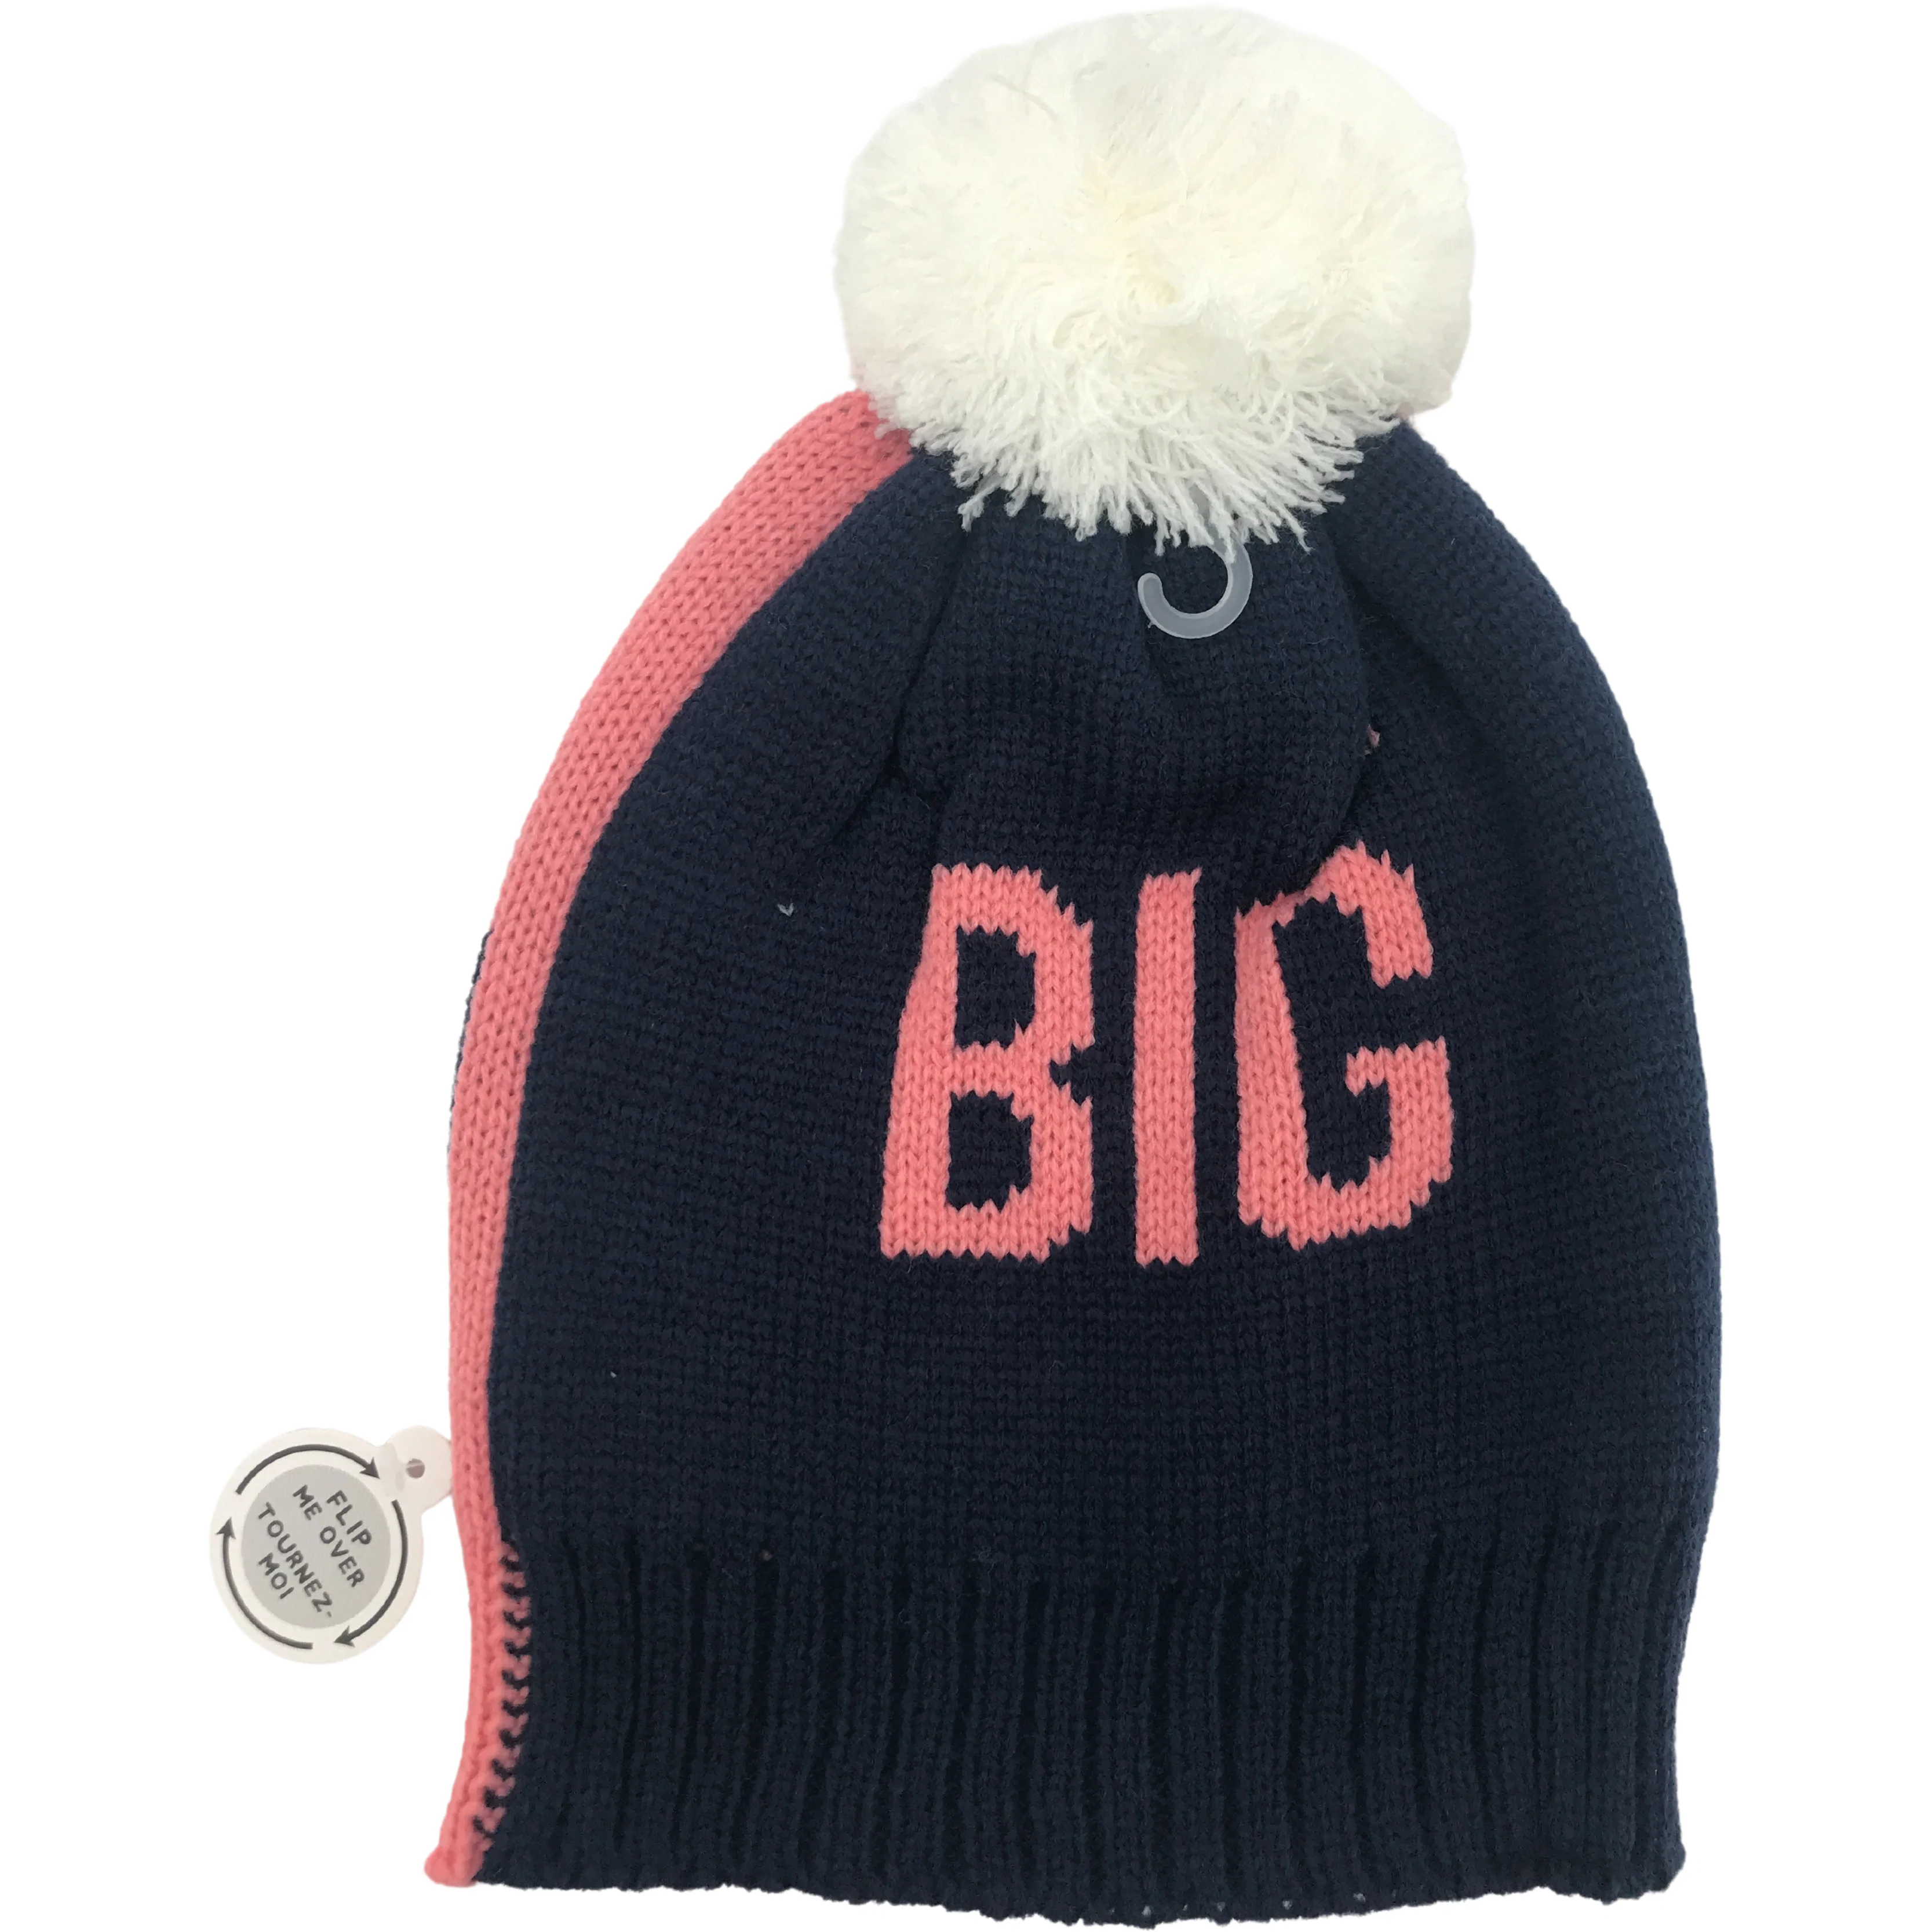 Densley & Co Girl's Youth Knit Hat / Winter Hat / Winter Toque / Pink, Blue & White